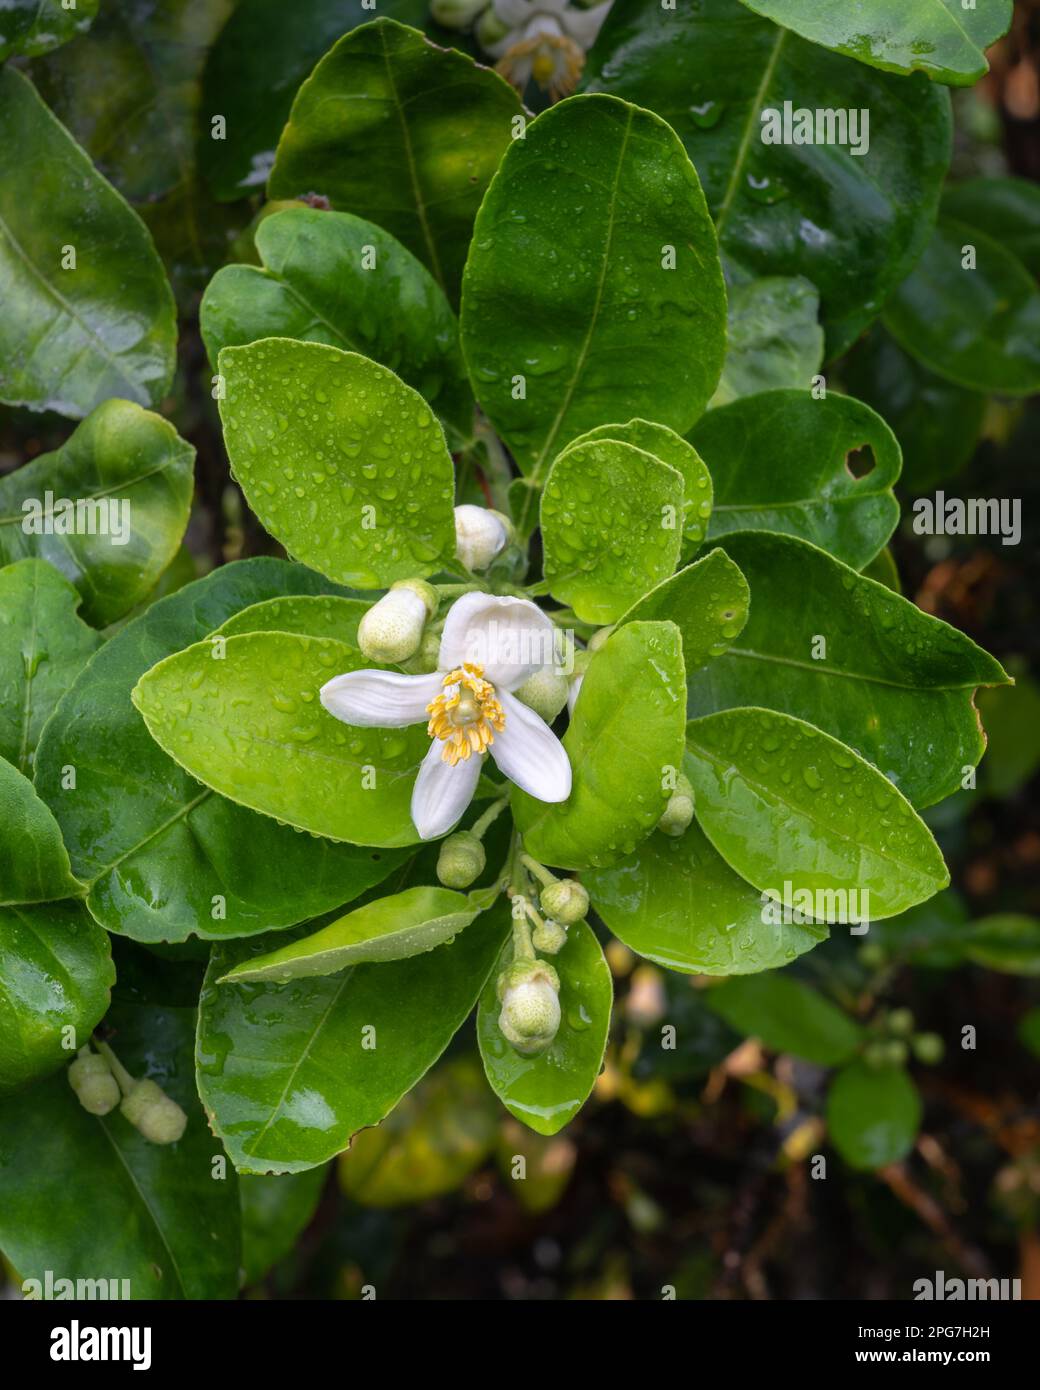 Closeup view of fresh white flower and buds among bright green foliage of citrus maxima aka pomelo tree blooming outdoors after the rain in Thailand Stock Photo